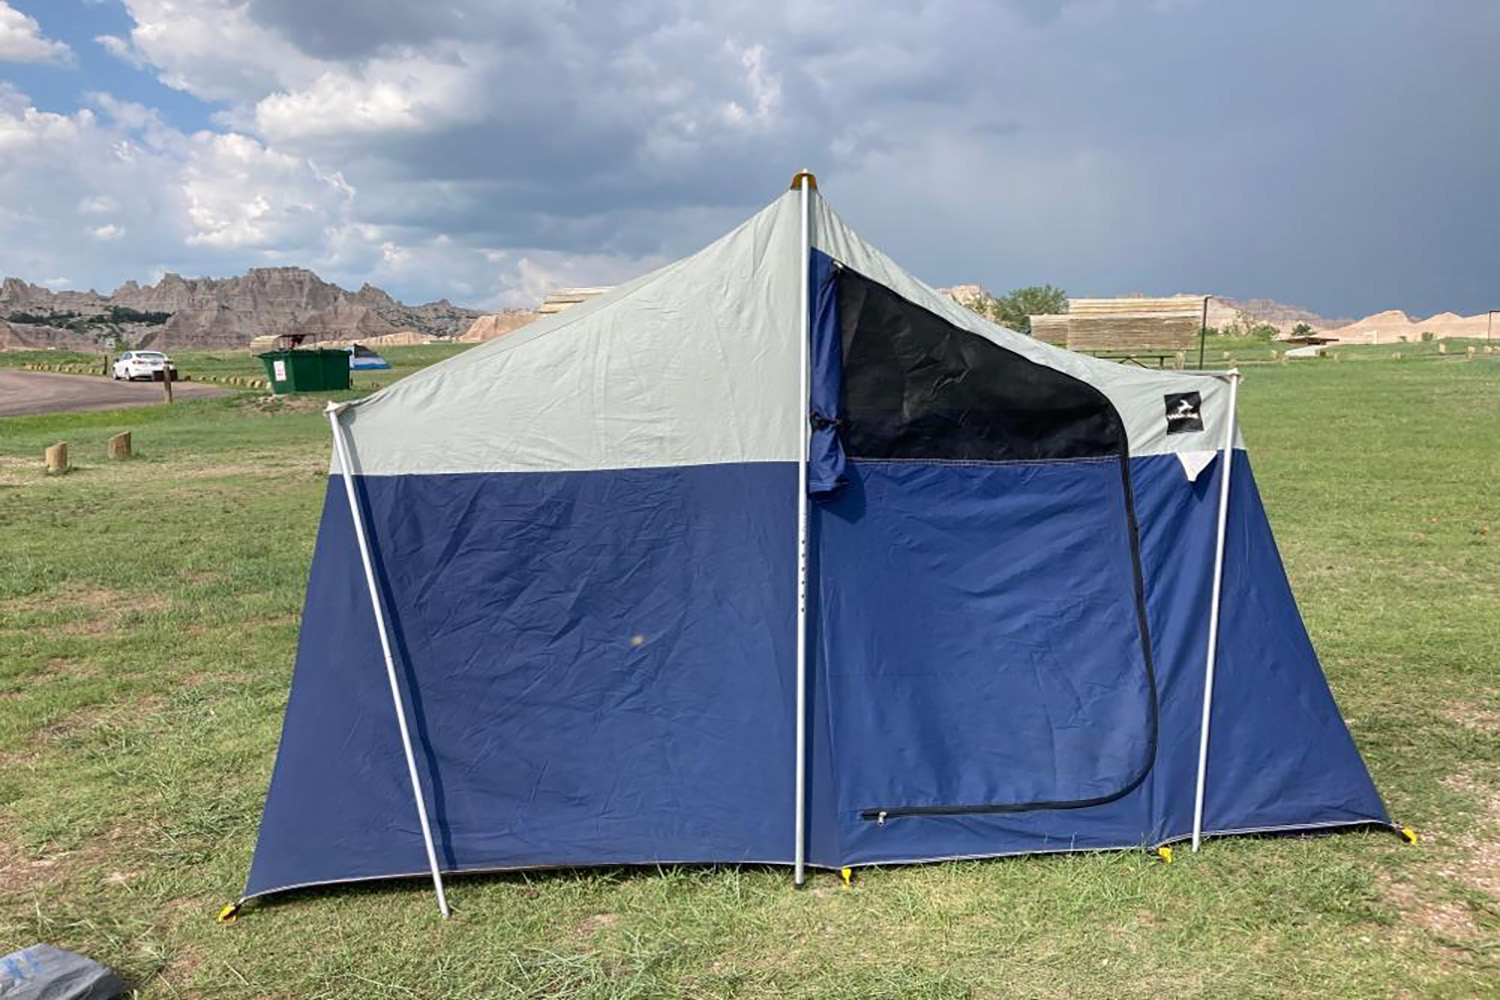 A blue and white tent set up at a campground at the Badlands National Park.